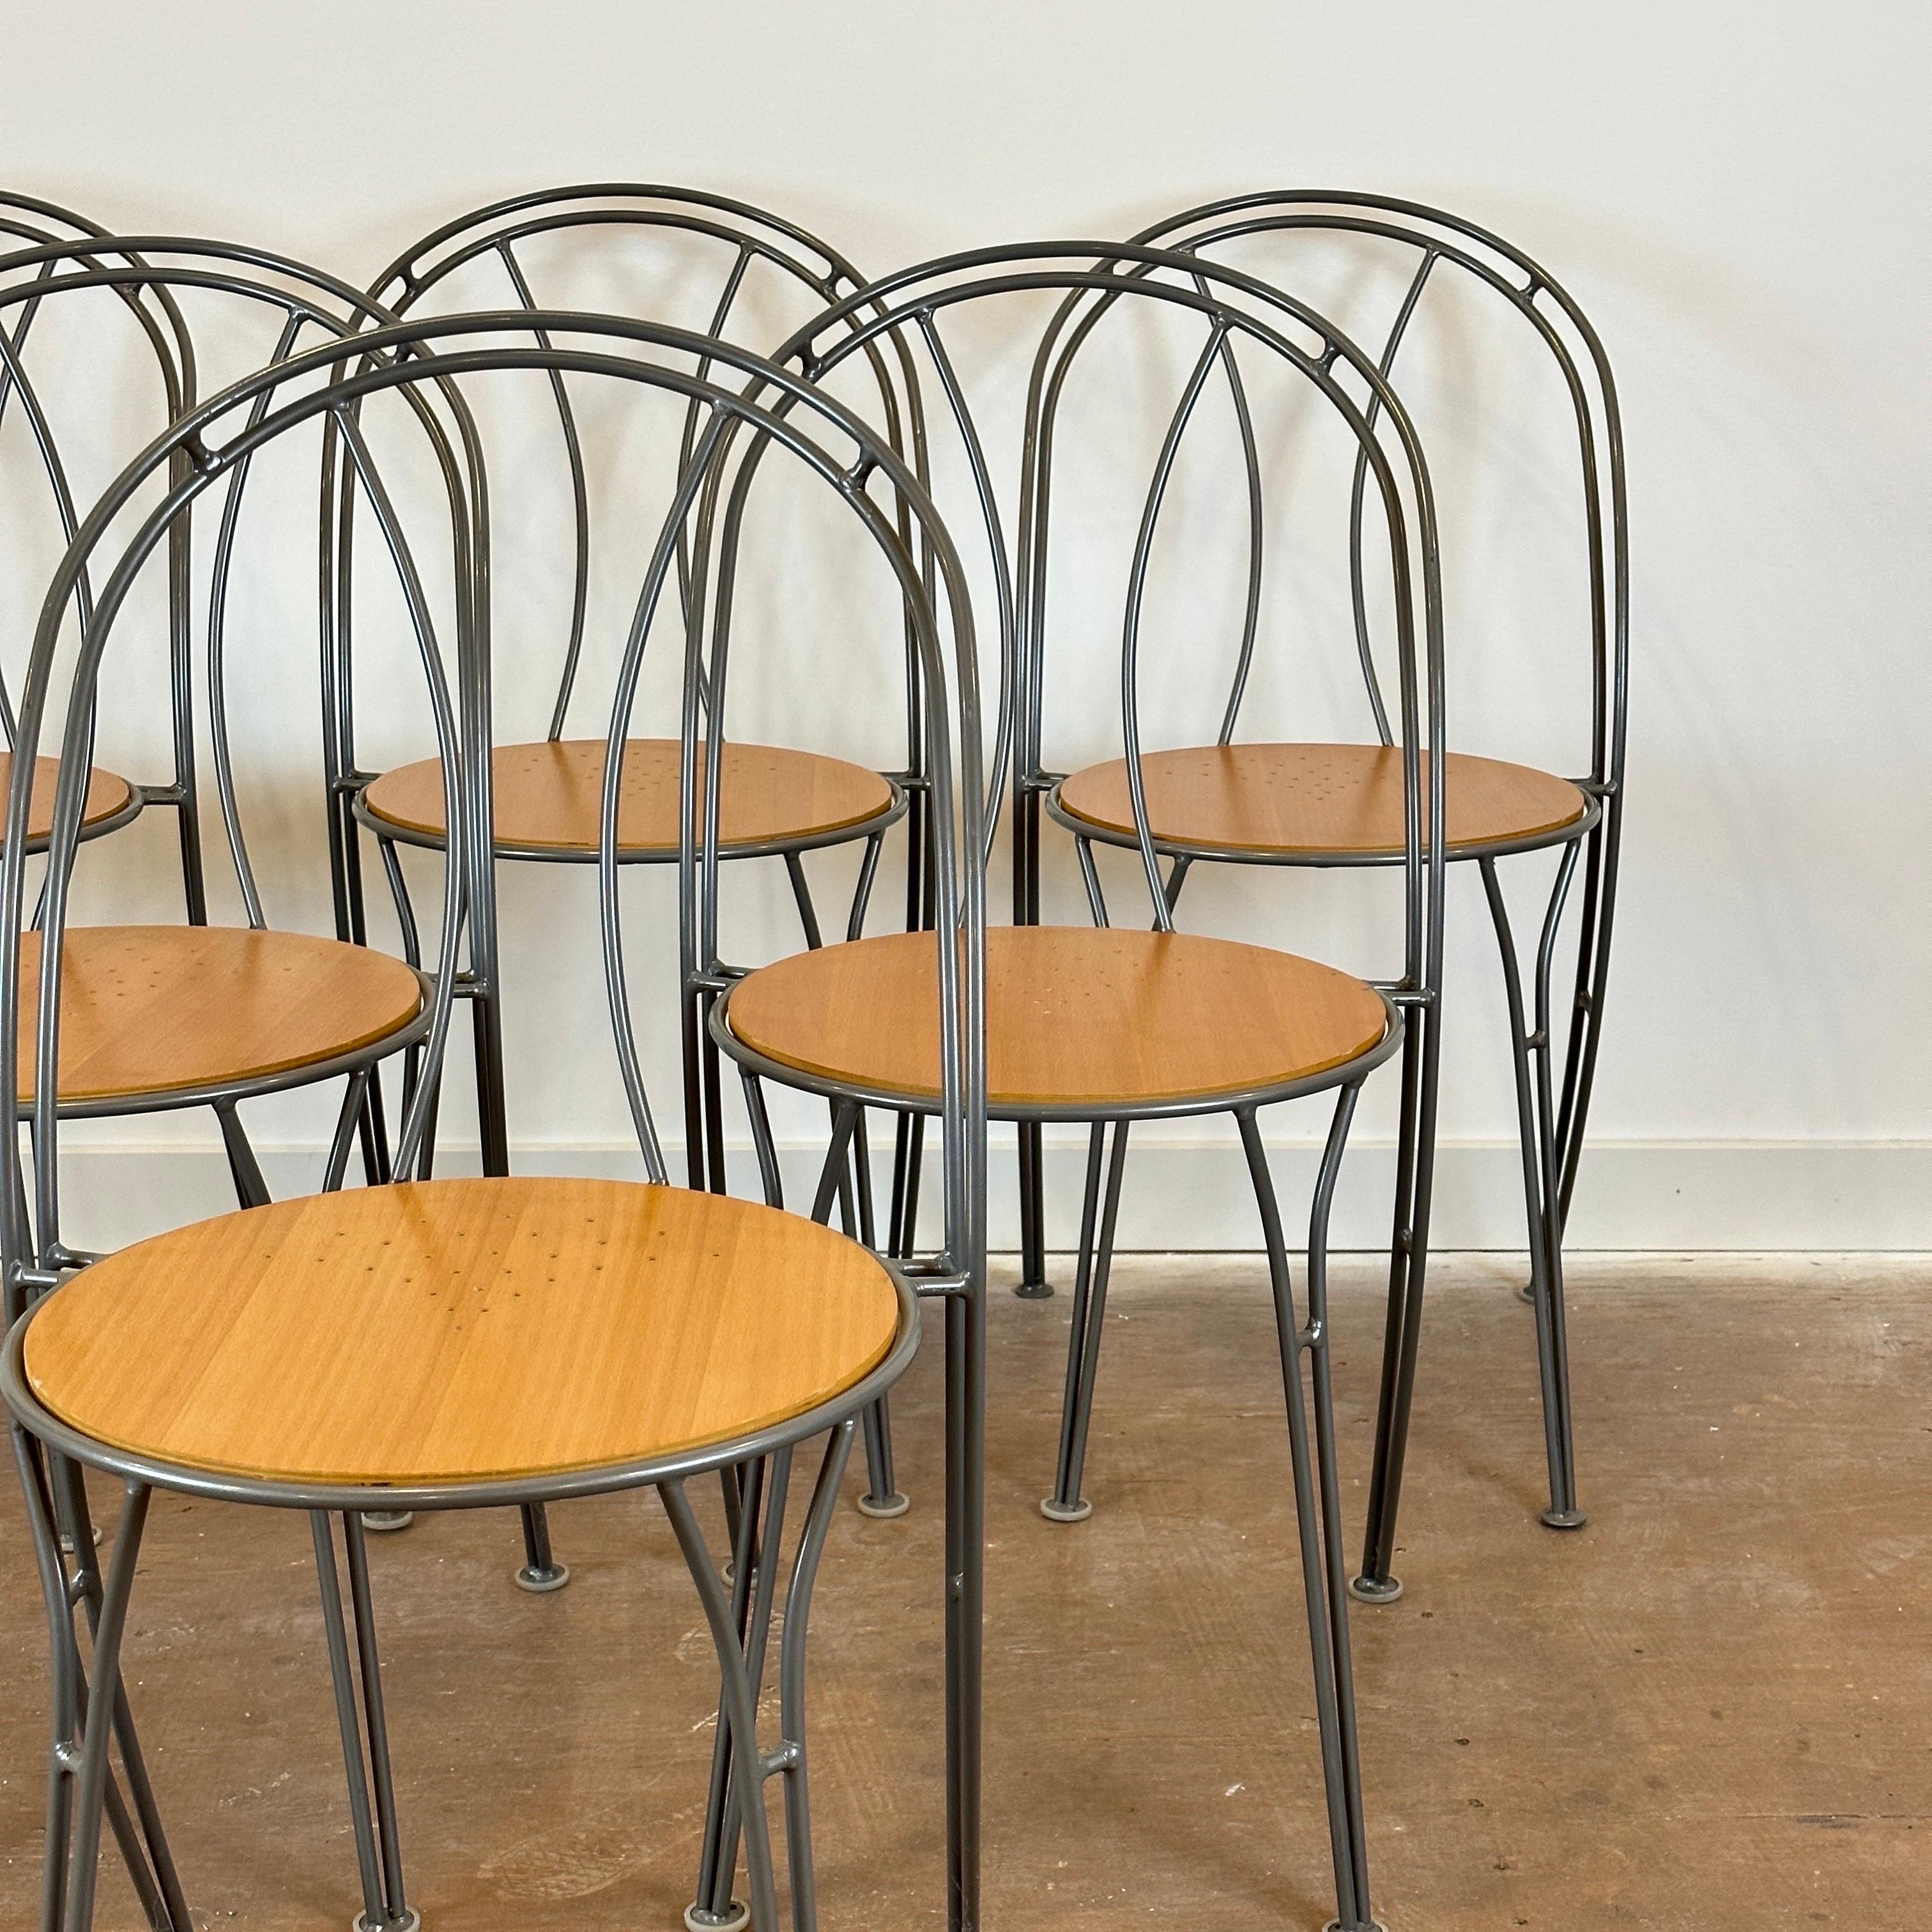 Condition: Excellent Vintage Condition

Dimensions: 16.75” L x 18” D x 33.25” H (18.25” SH)

Description: Vintage metal dining chair set of 6 likely designed by Neils Gammelgaard. Made in Sweden, circa 1980s.

Price is for the set of 6.